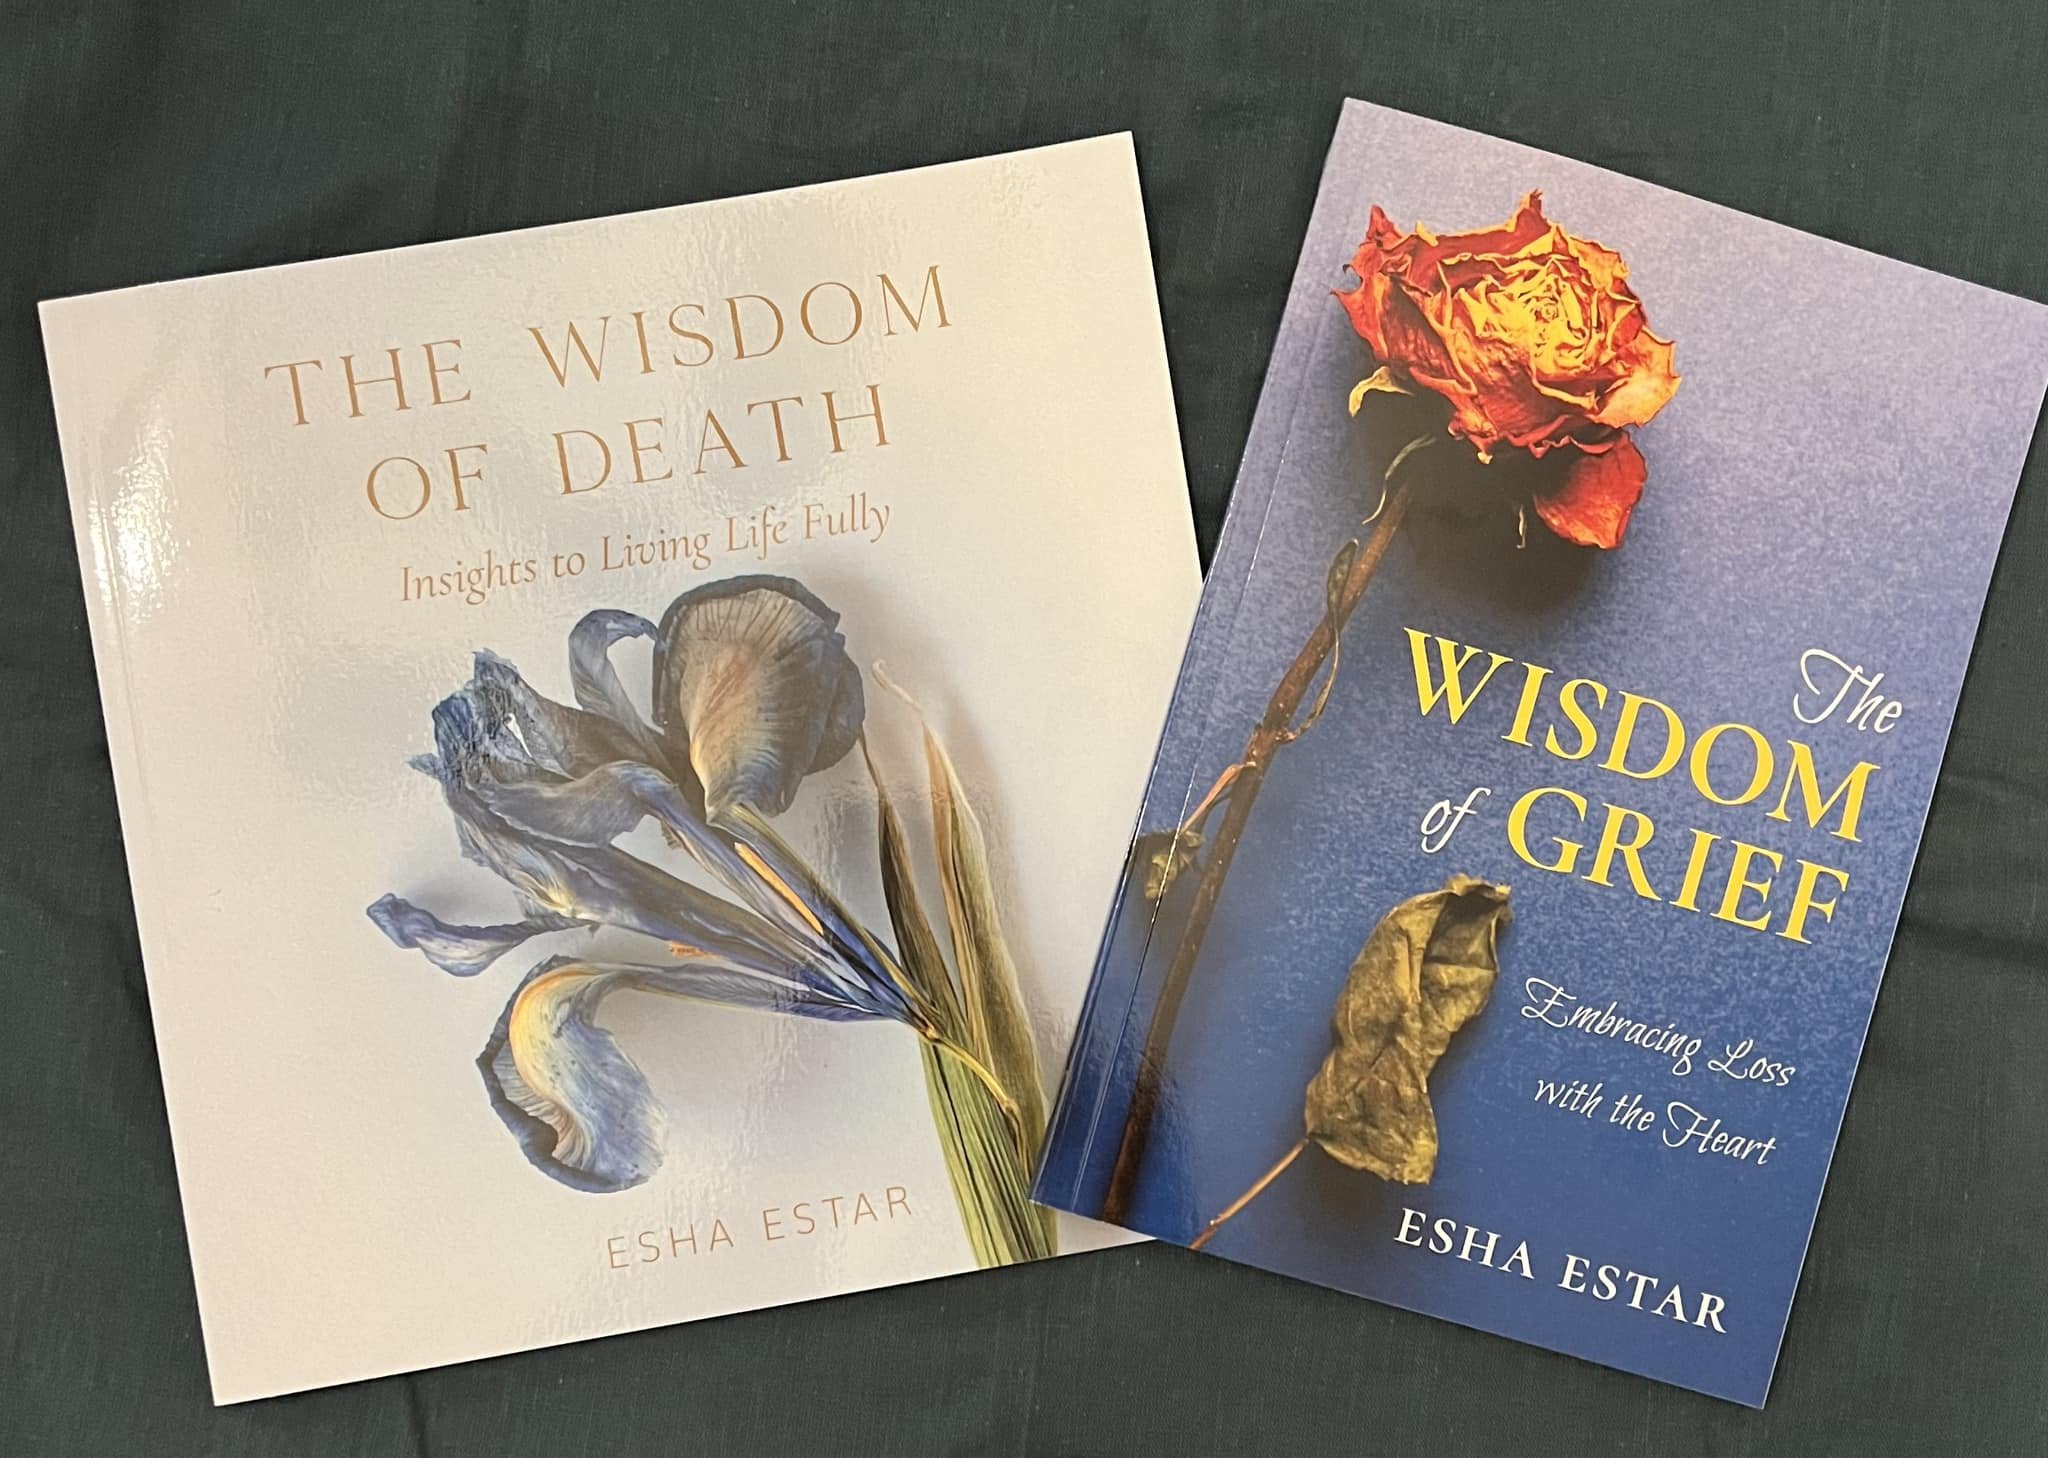 Book Signing✨✨

Two years ago I wrote &ldquo;The Wisdom of Death&rdquo; and &ldquo;The Wisdom of Grief.&rdquo; They were written from my direct experience with loss from the death of my husband in 2017, mother in 2015, and father in 1981. All the dea